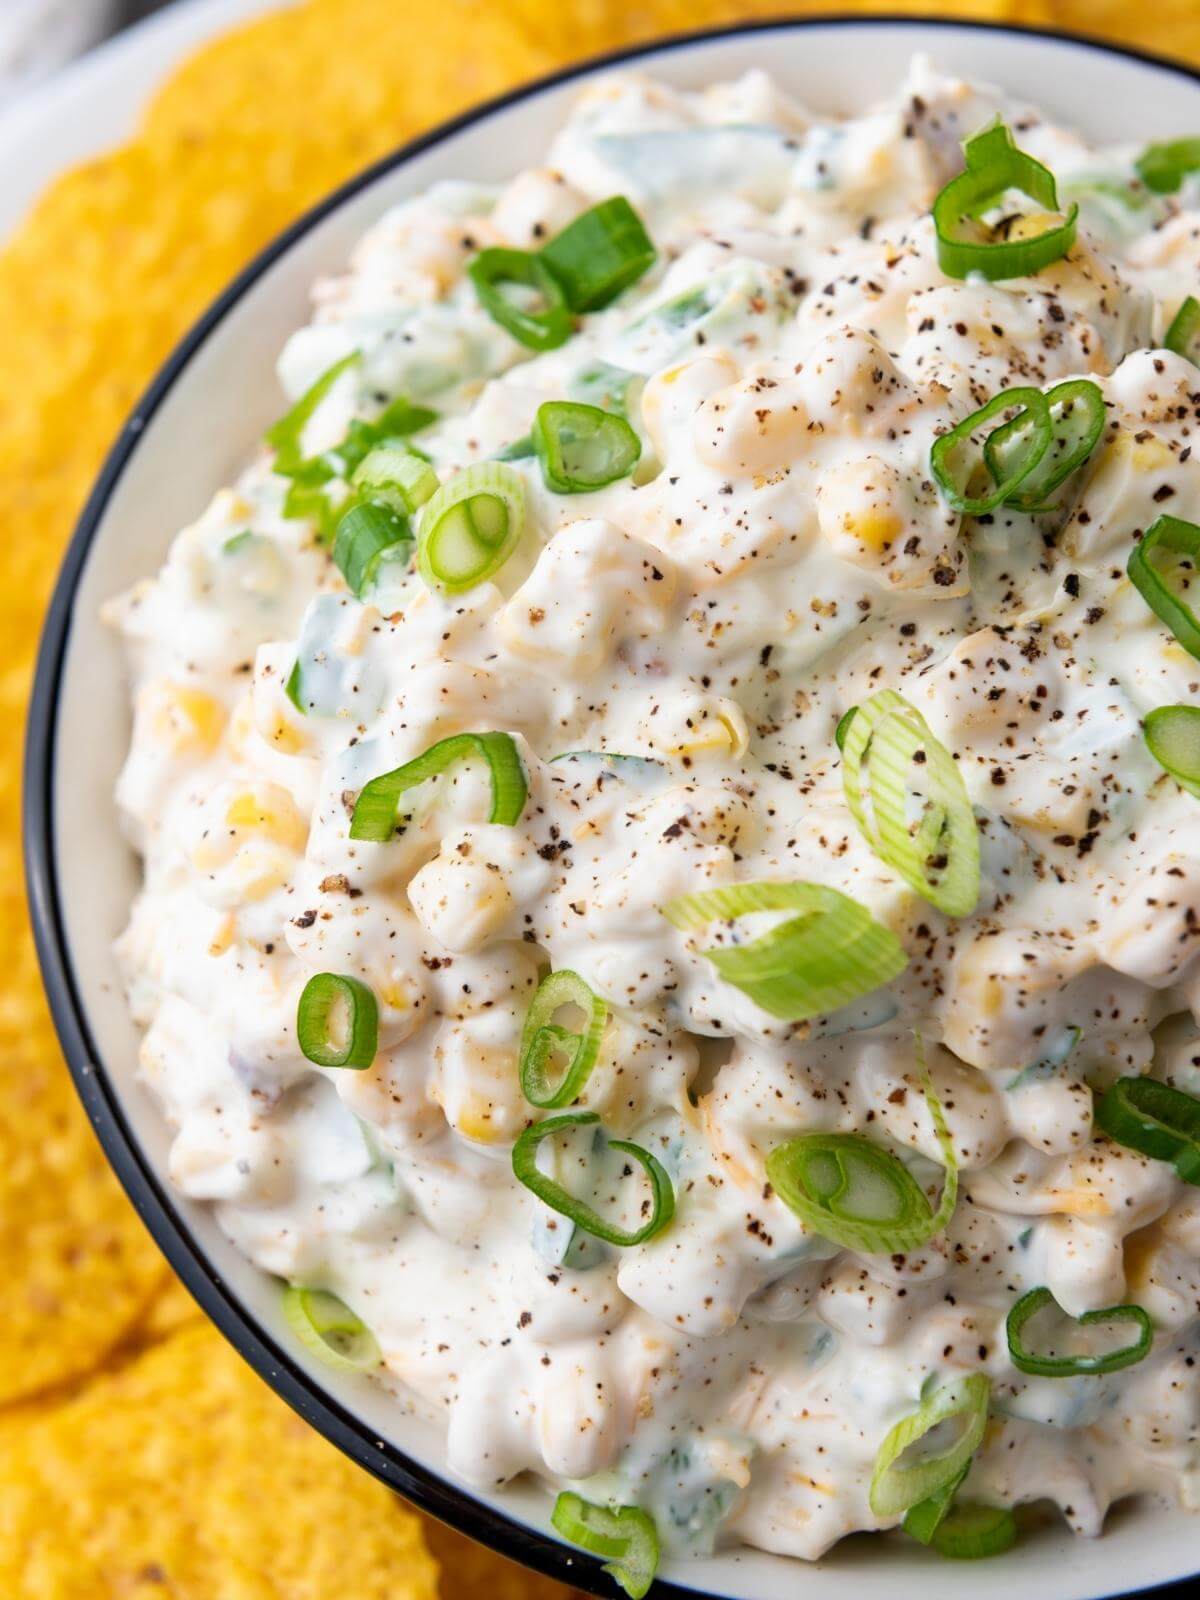 Creamy corn dip in a bowl with tortilla chips.